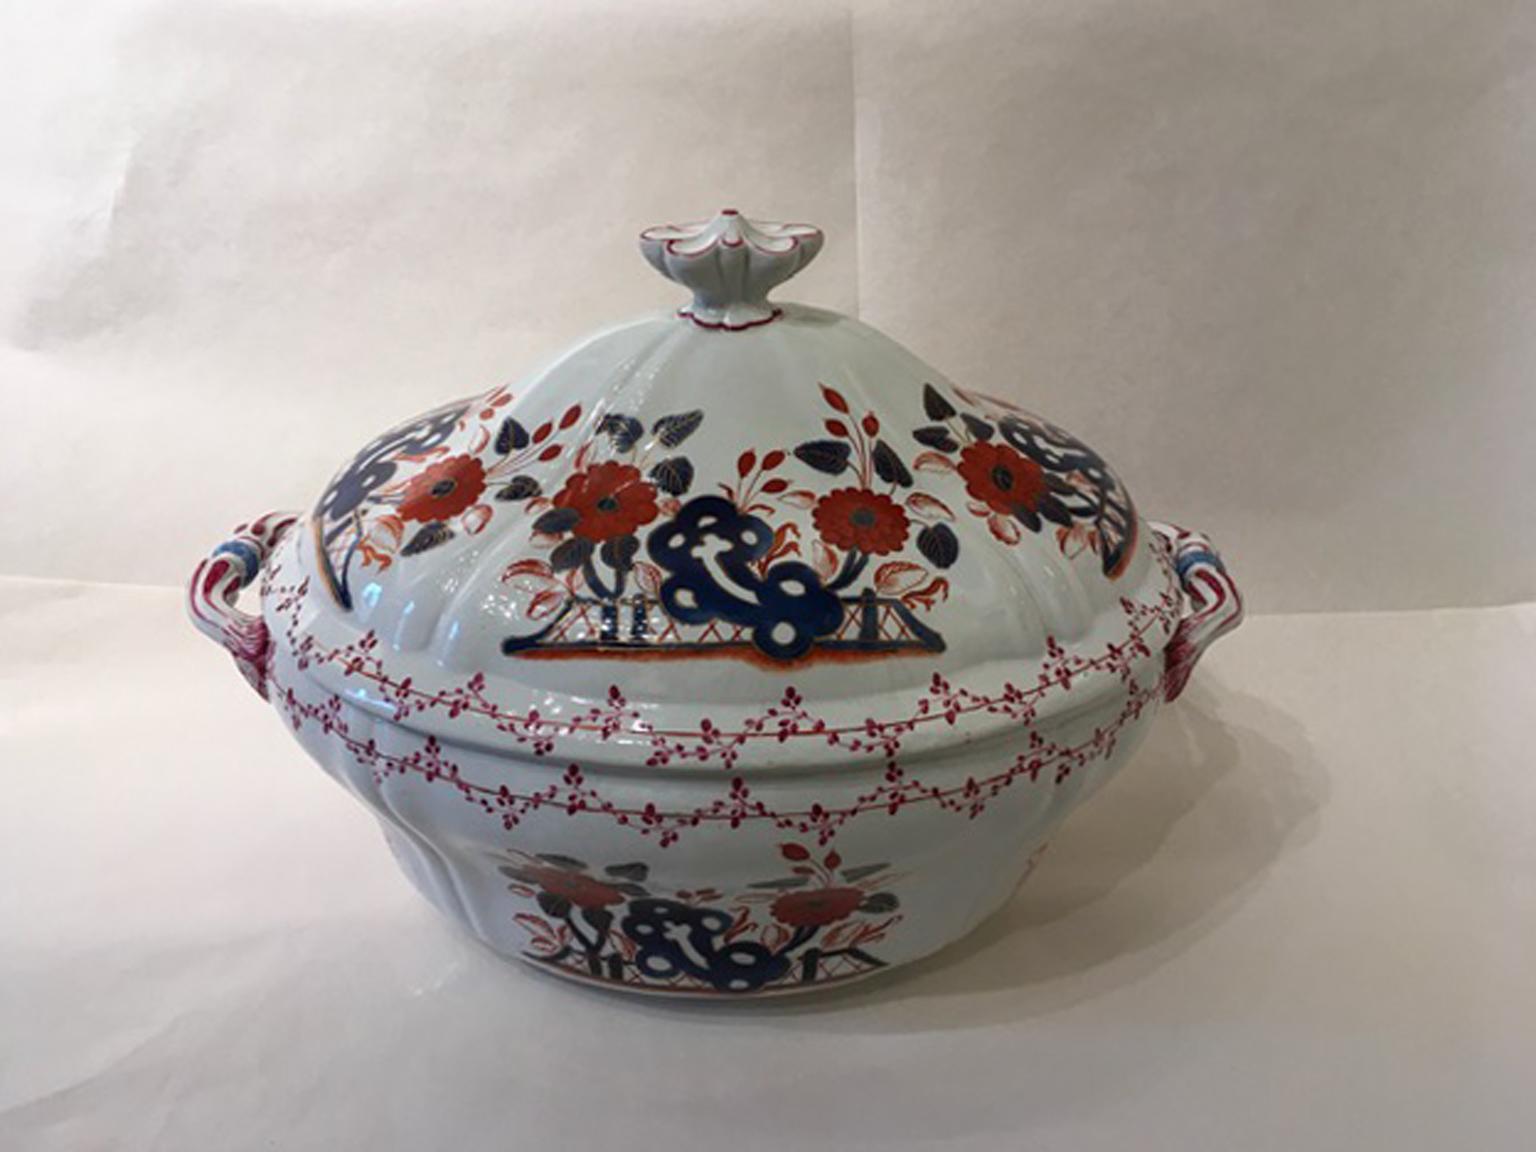 This is a beautiful piece made in Italy by Richard Ginori in the late 18th Century. The elegant  and iconic handmade decor in red and blue is called ‘Corean’ inspired by Oriental style.
The soup tureen has an under plate available to purchase from